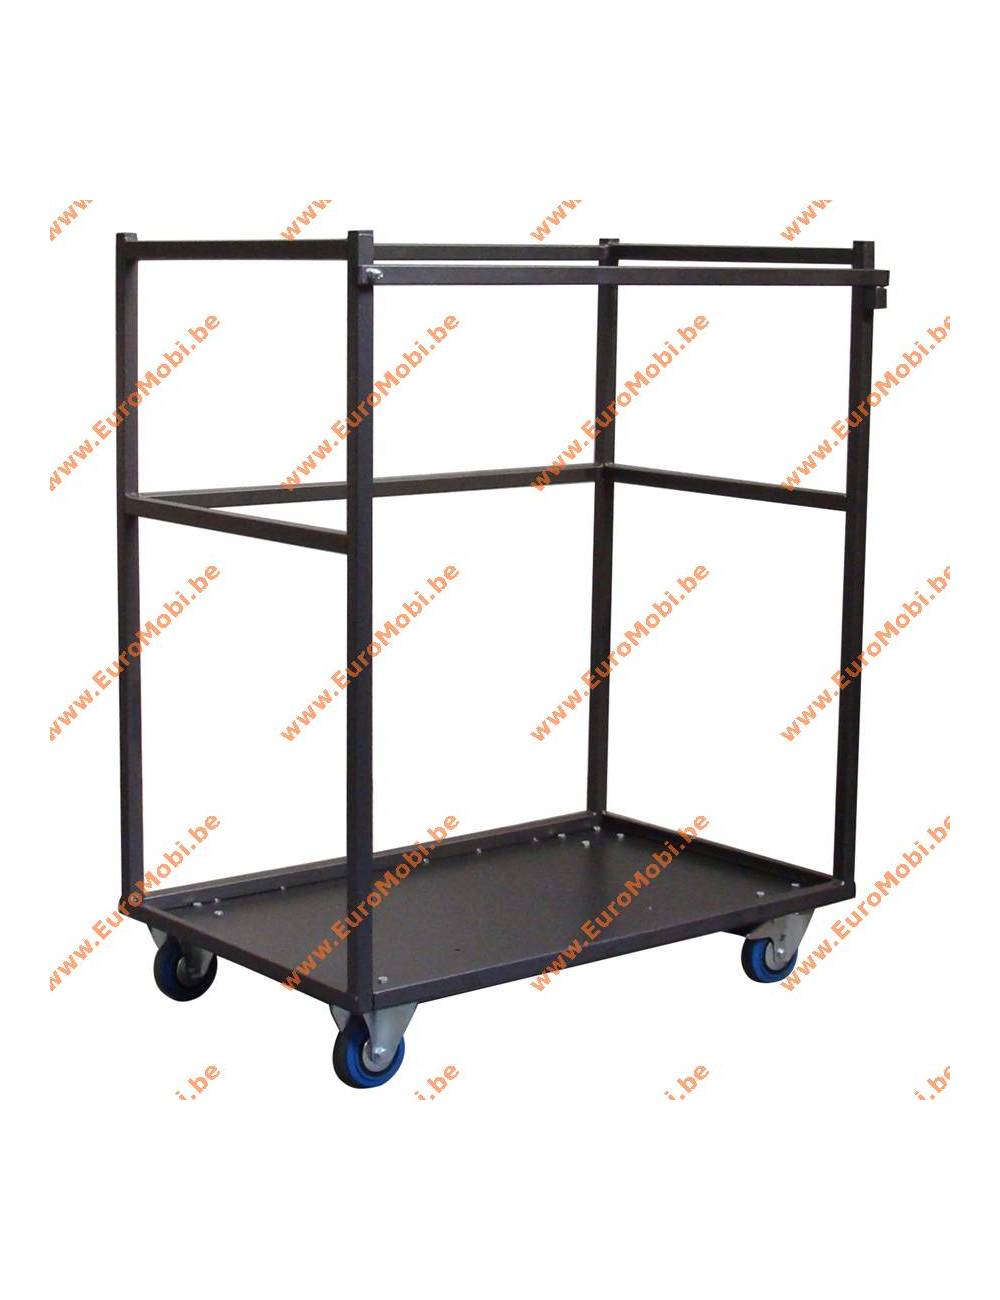 Small transport trolley for standing tables Melin empty